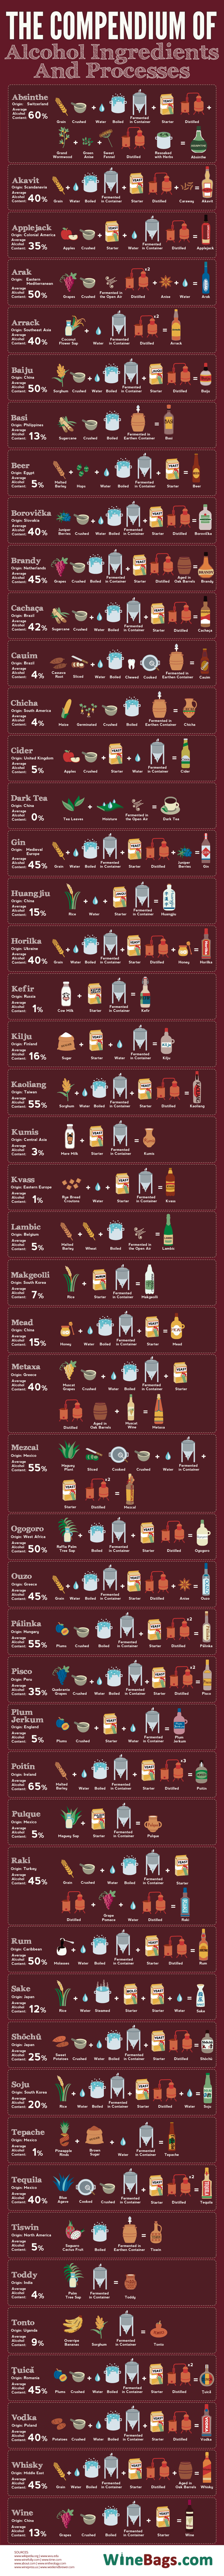 infographie-alcool-ingredients-fabrication-extract